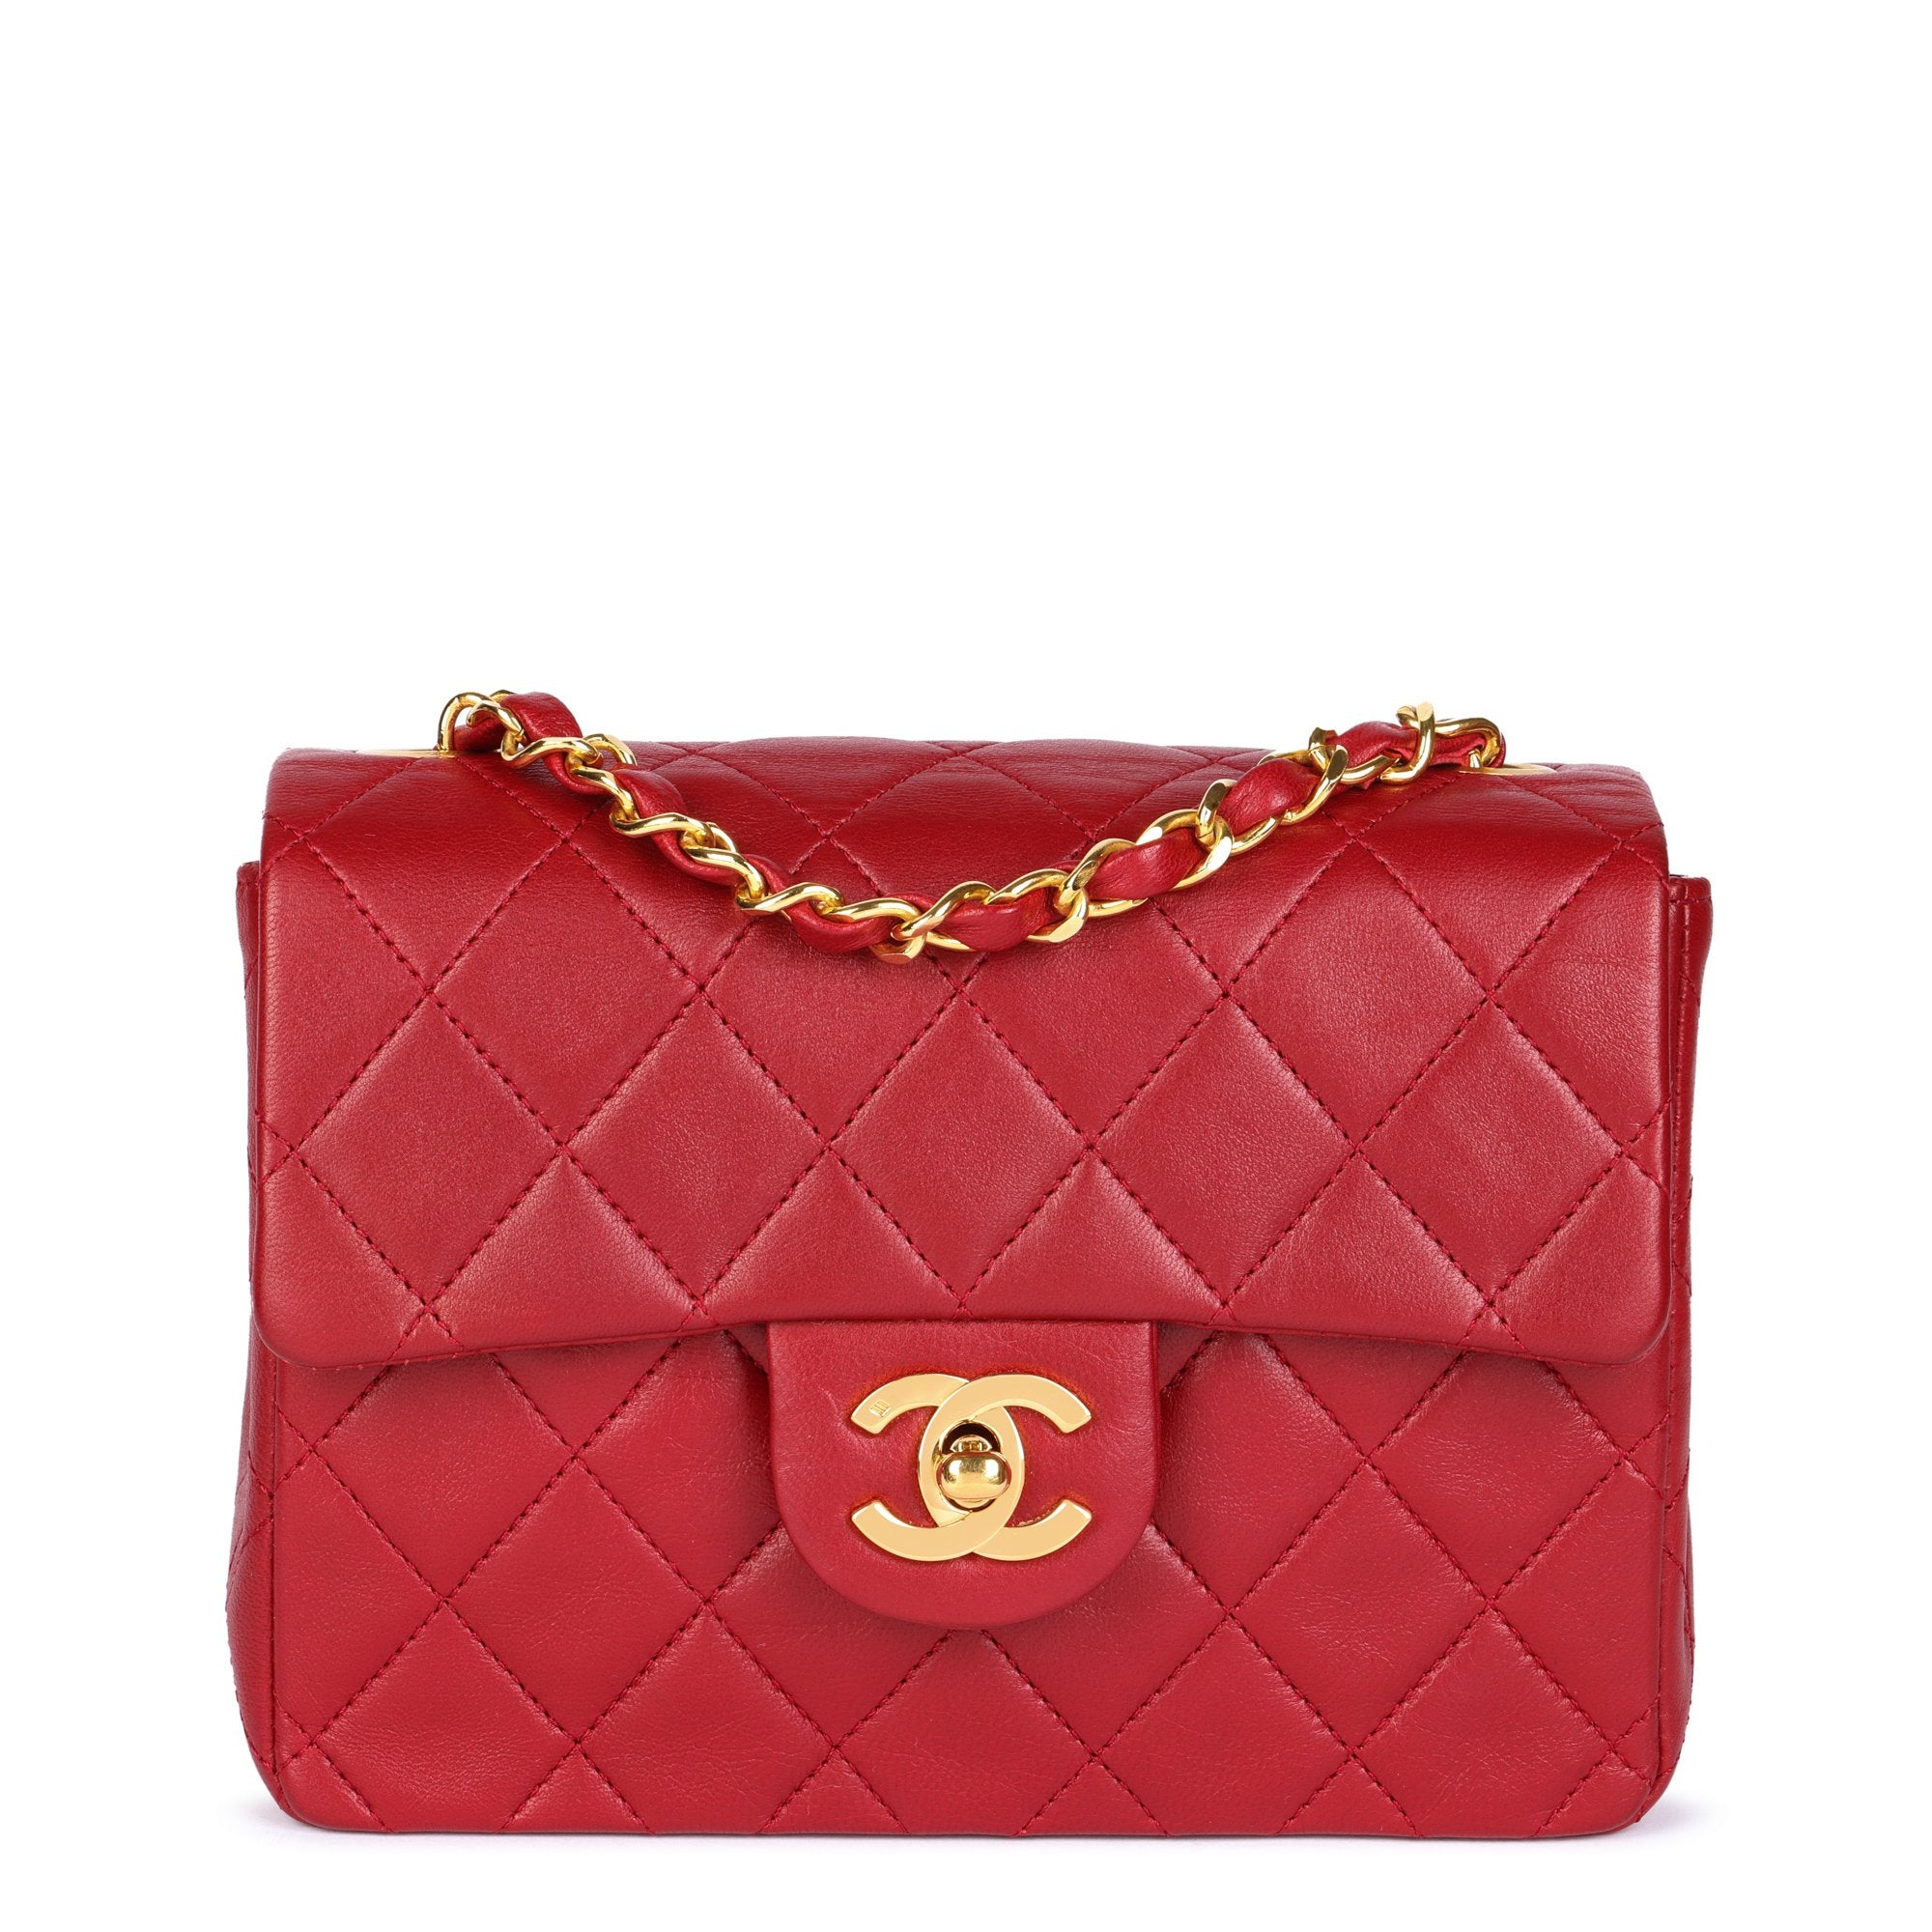 Chanel Red Quilted Lambskin Vintage Square Mini Flap Bag